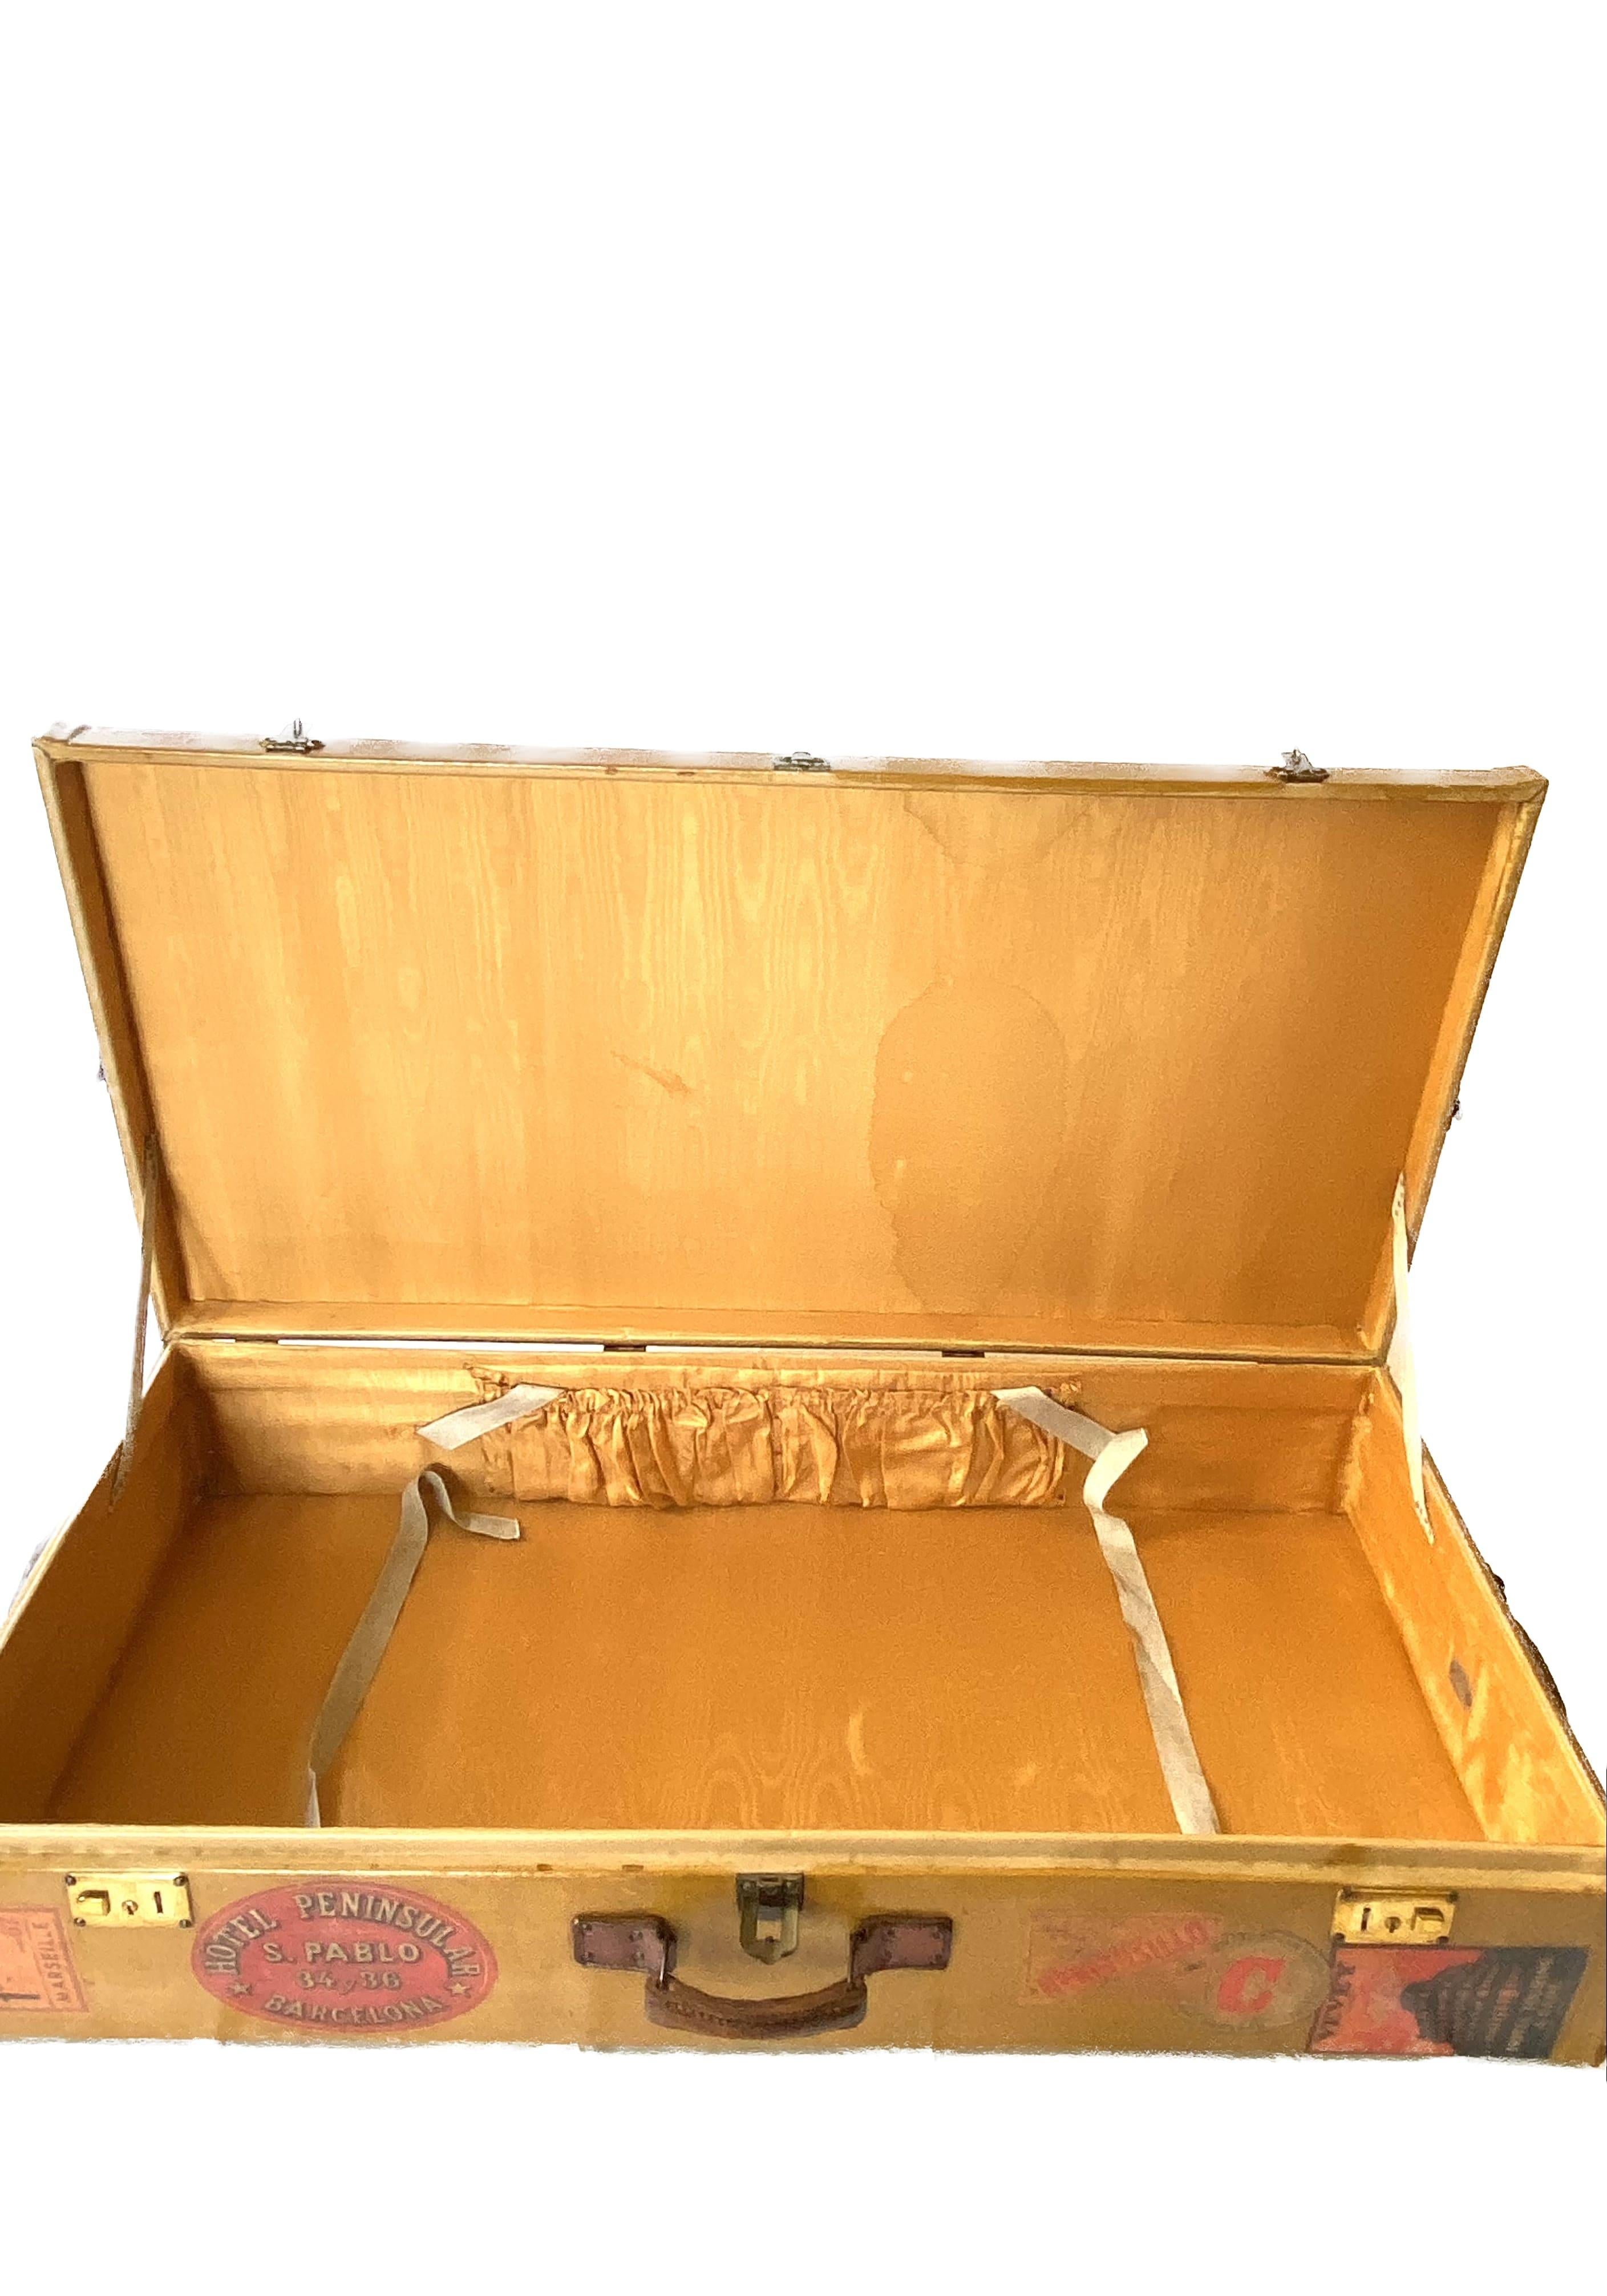 Antique Italian Leather Travel Case, Early 20th Century For Sale 6